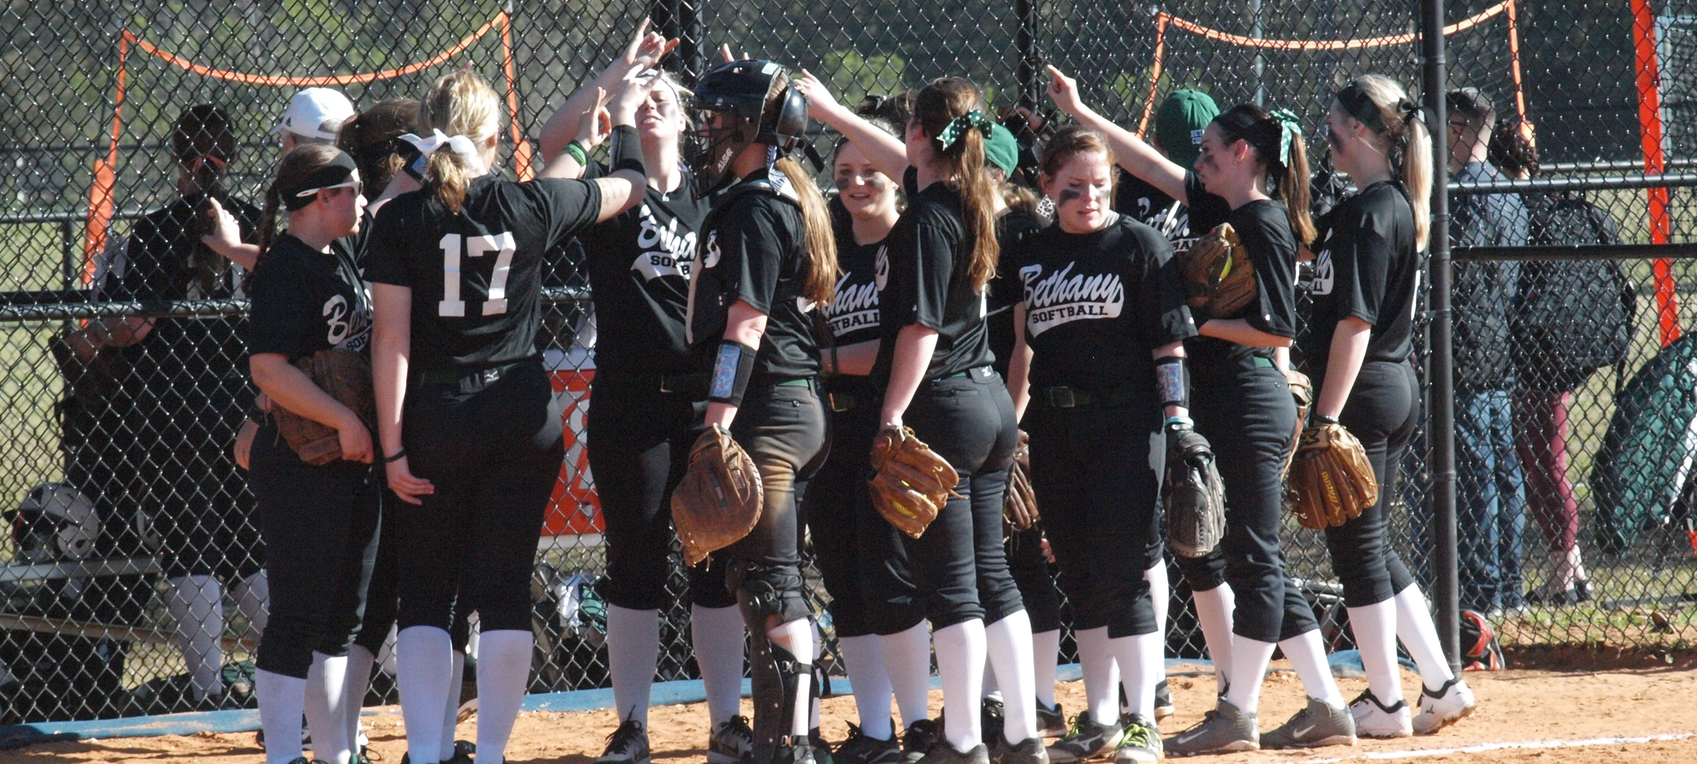 Bison Softball Falls Prey to a Pair of Walk-Offs in PAC Championship Final